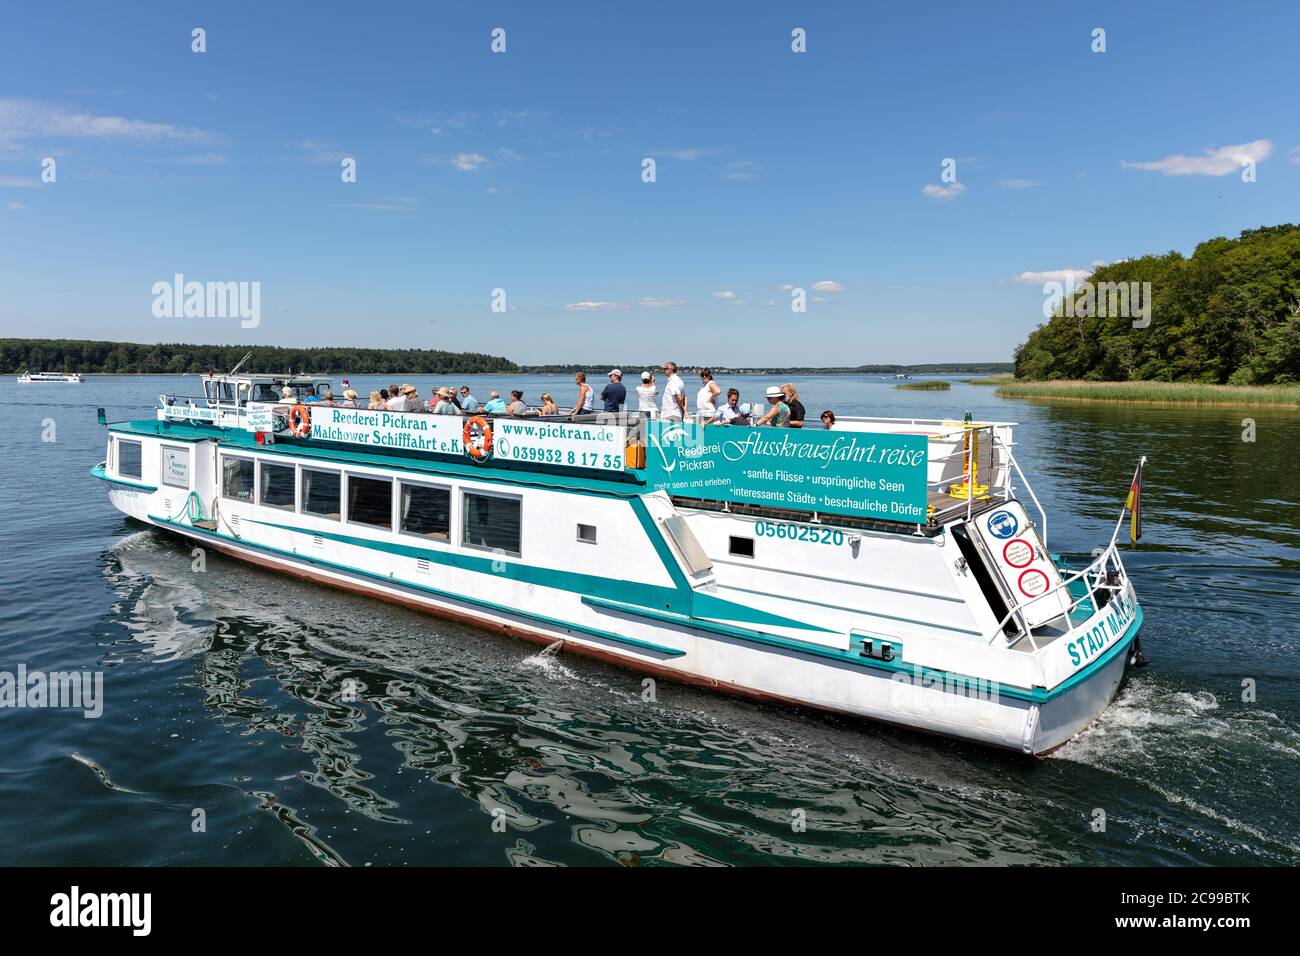 excursion boat STADT MALCHOW of Reederei Pickran on the Lake Plau, Germany Stock Photo